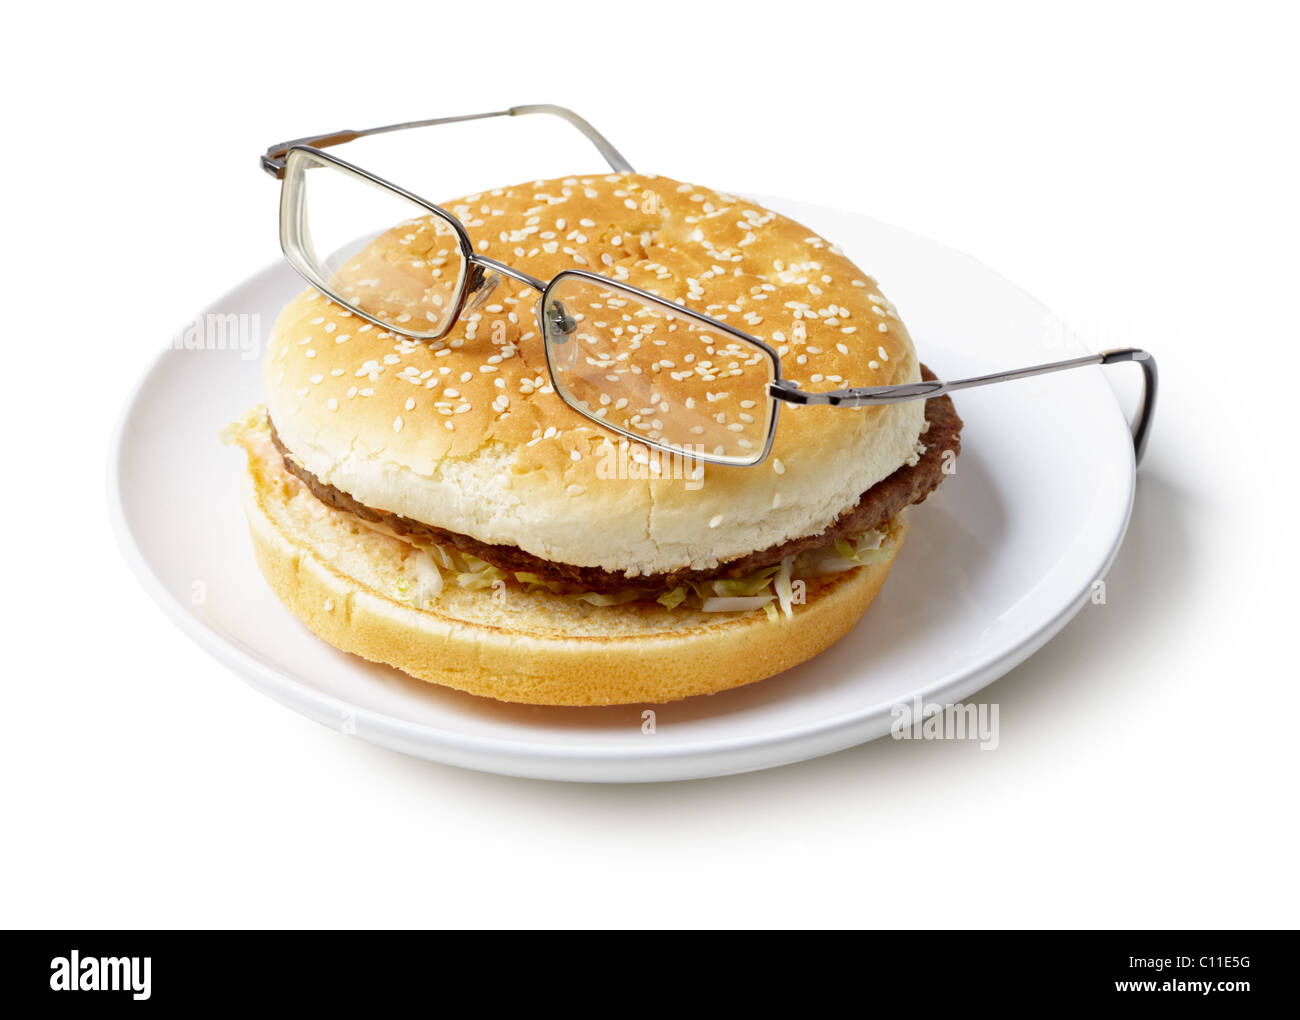 Amusing sandwich in spectacles isolated on a white background Stock Photo